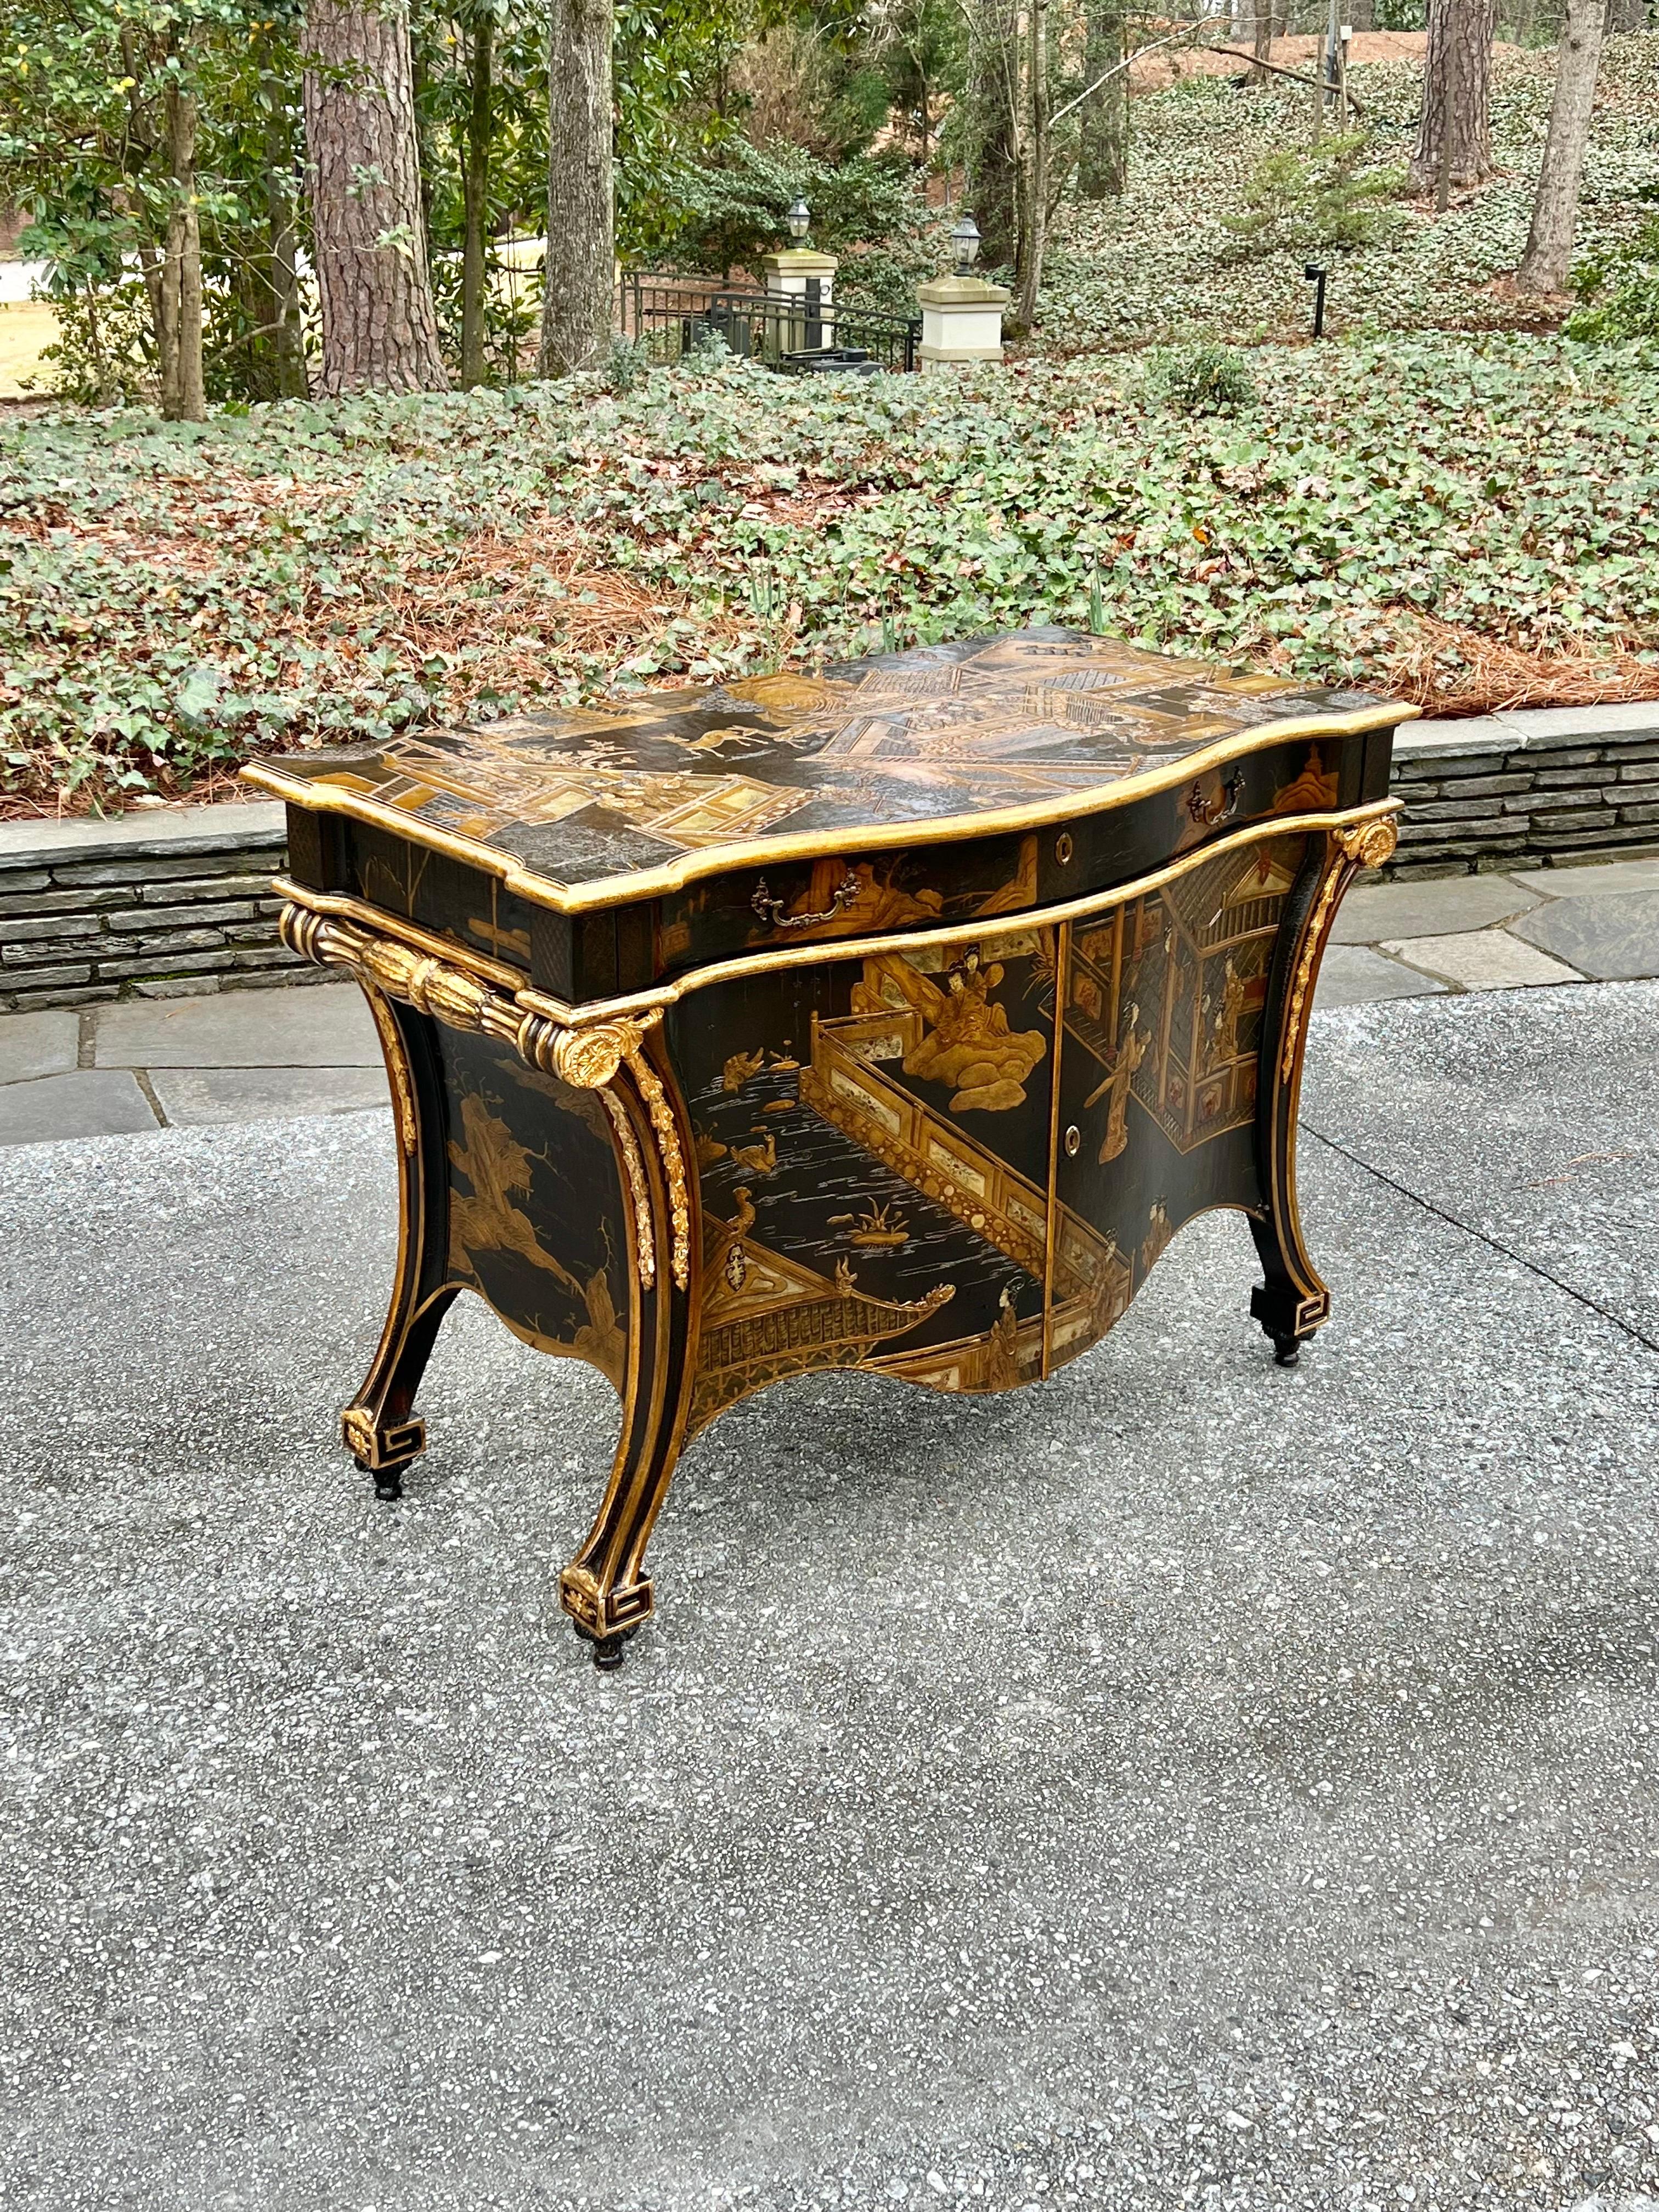 This magnificent commode is shipped as professionally photographed and described in the listing narrative: Meticulously professionally restored and completely installation ready.

An exquisite Chippendale style hand pained chinoiserie commode in